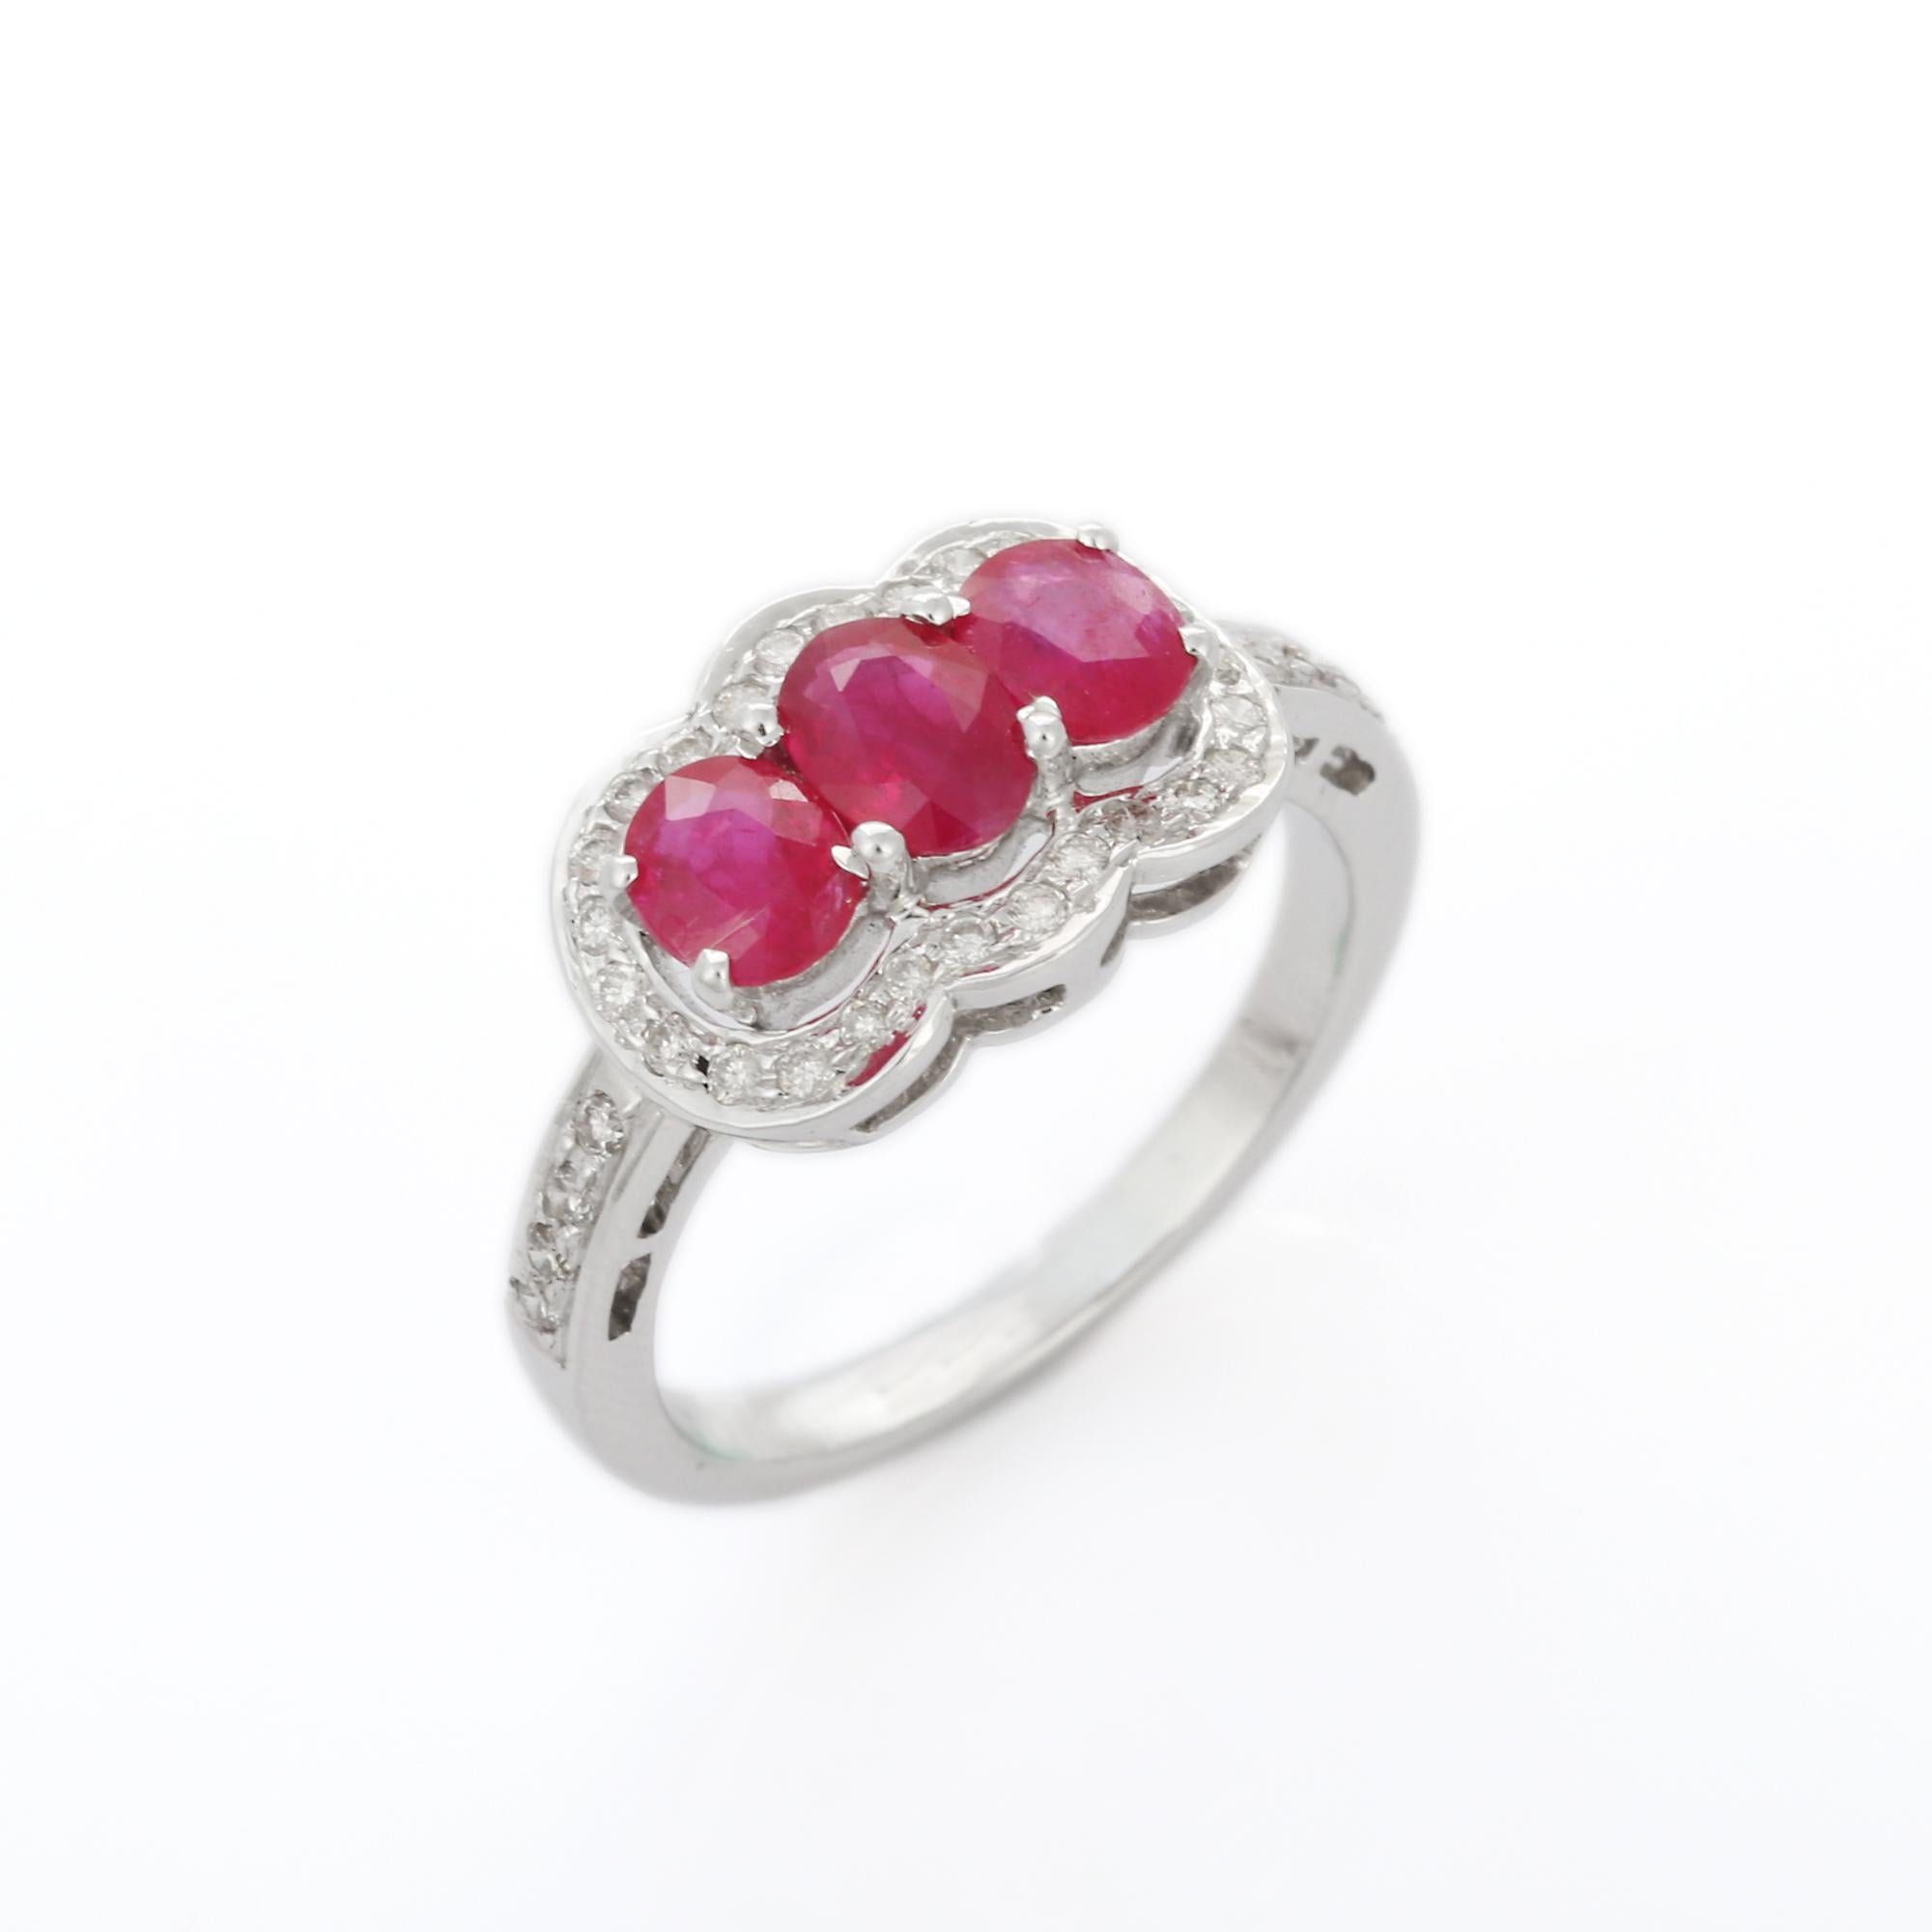 For Sale:  Oval Cut Three Stone Ruby Engagement Ring in 18K White Gold with Diamonds 13